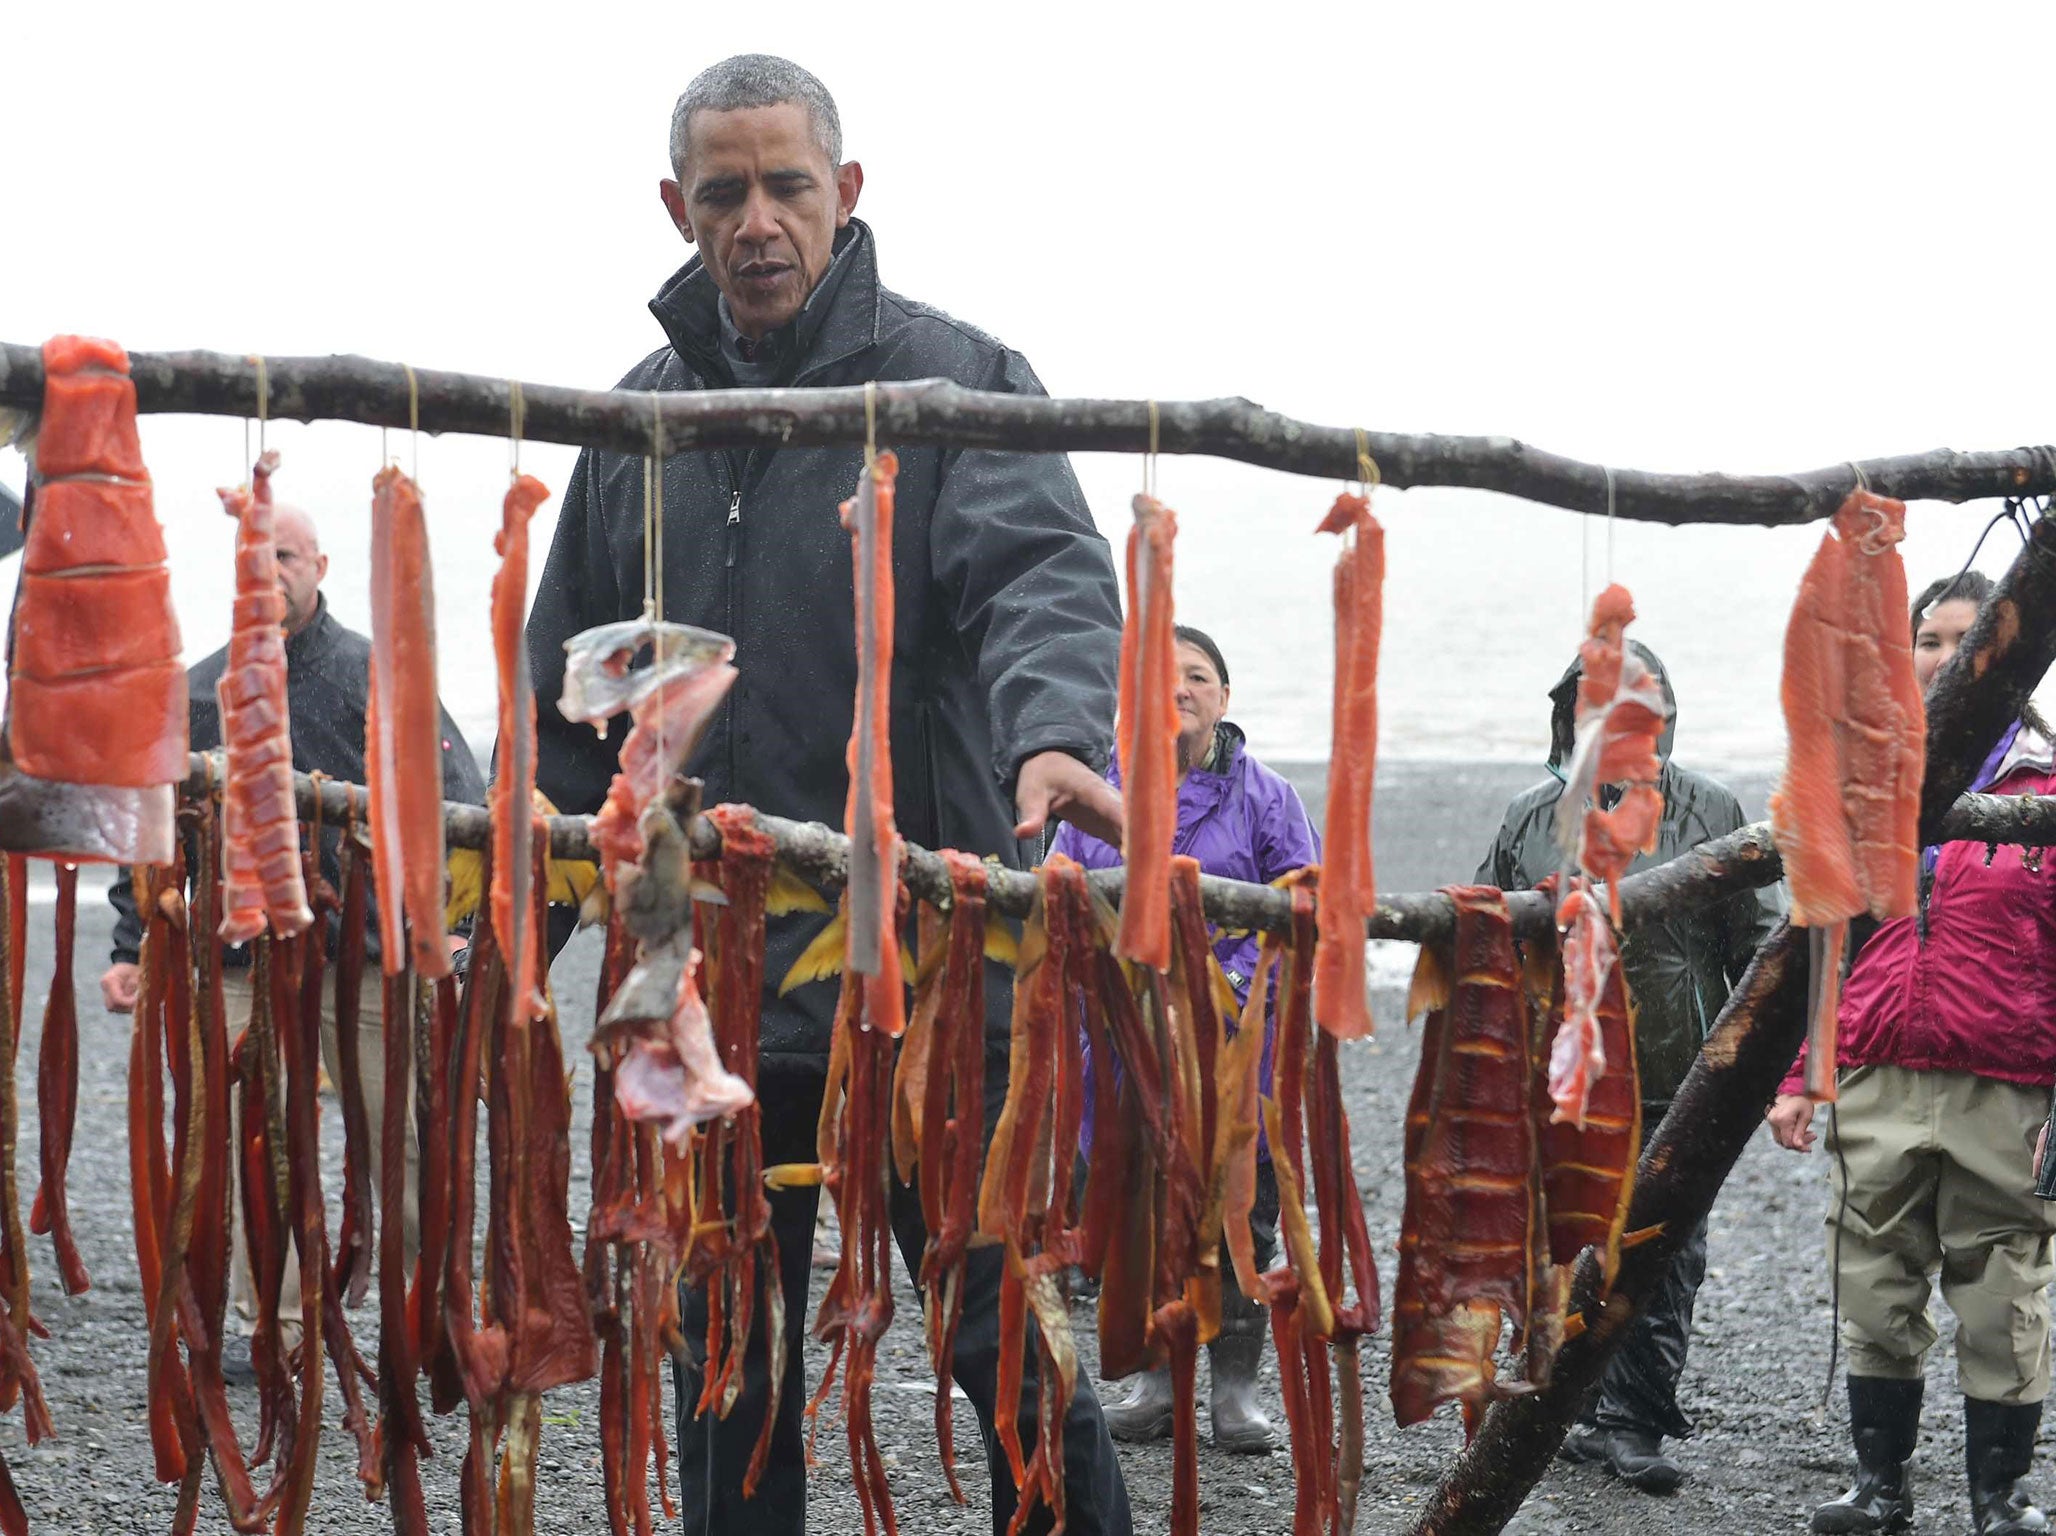 US President Barack Obama looks at salmon drying on a rack while meeting with local fishermen and their families on Kanakanak Beach in Dillingham, Alaska on September 2, 2015. Regulators have said that the GM fish look identical with their normal counterparts